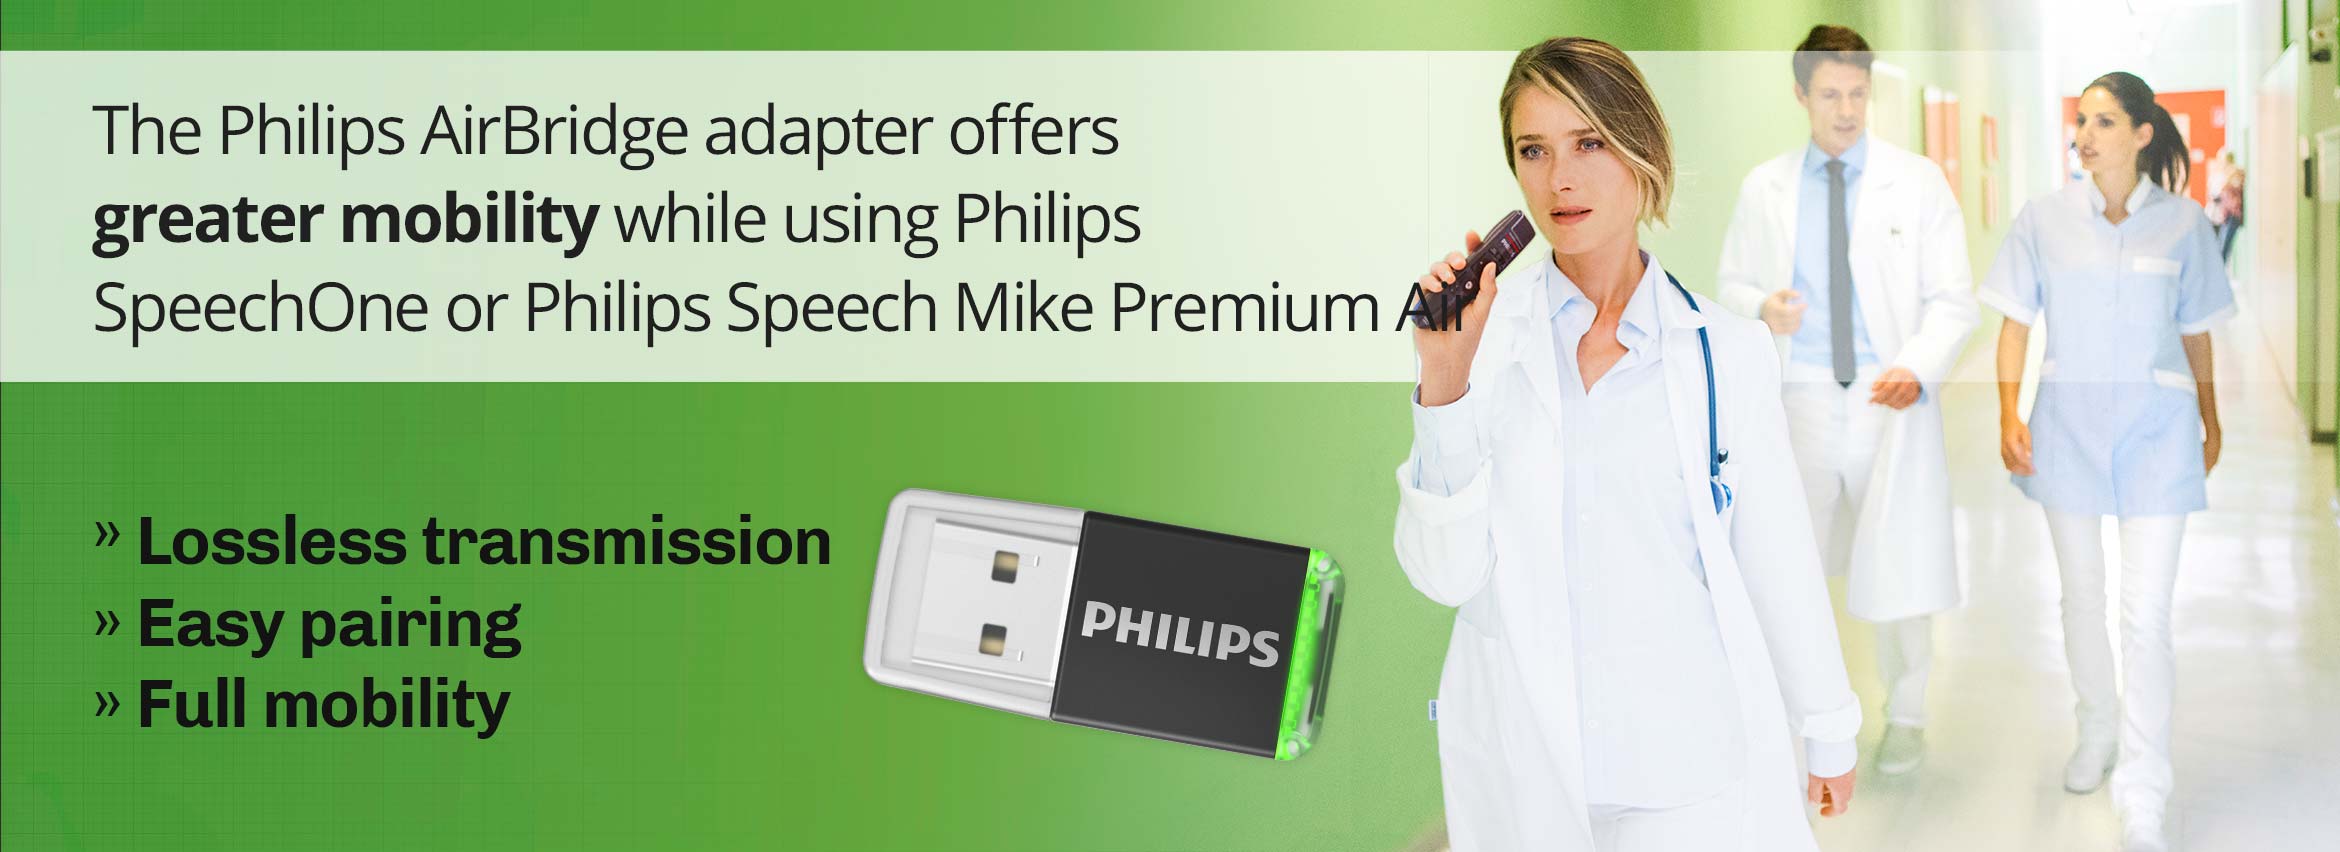 The Philips AirBridge adapter offers greater mobility while using Philips SpeechOne or Philips Speech Mike Premium Air